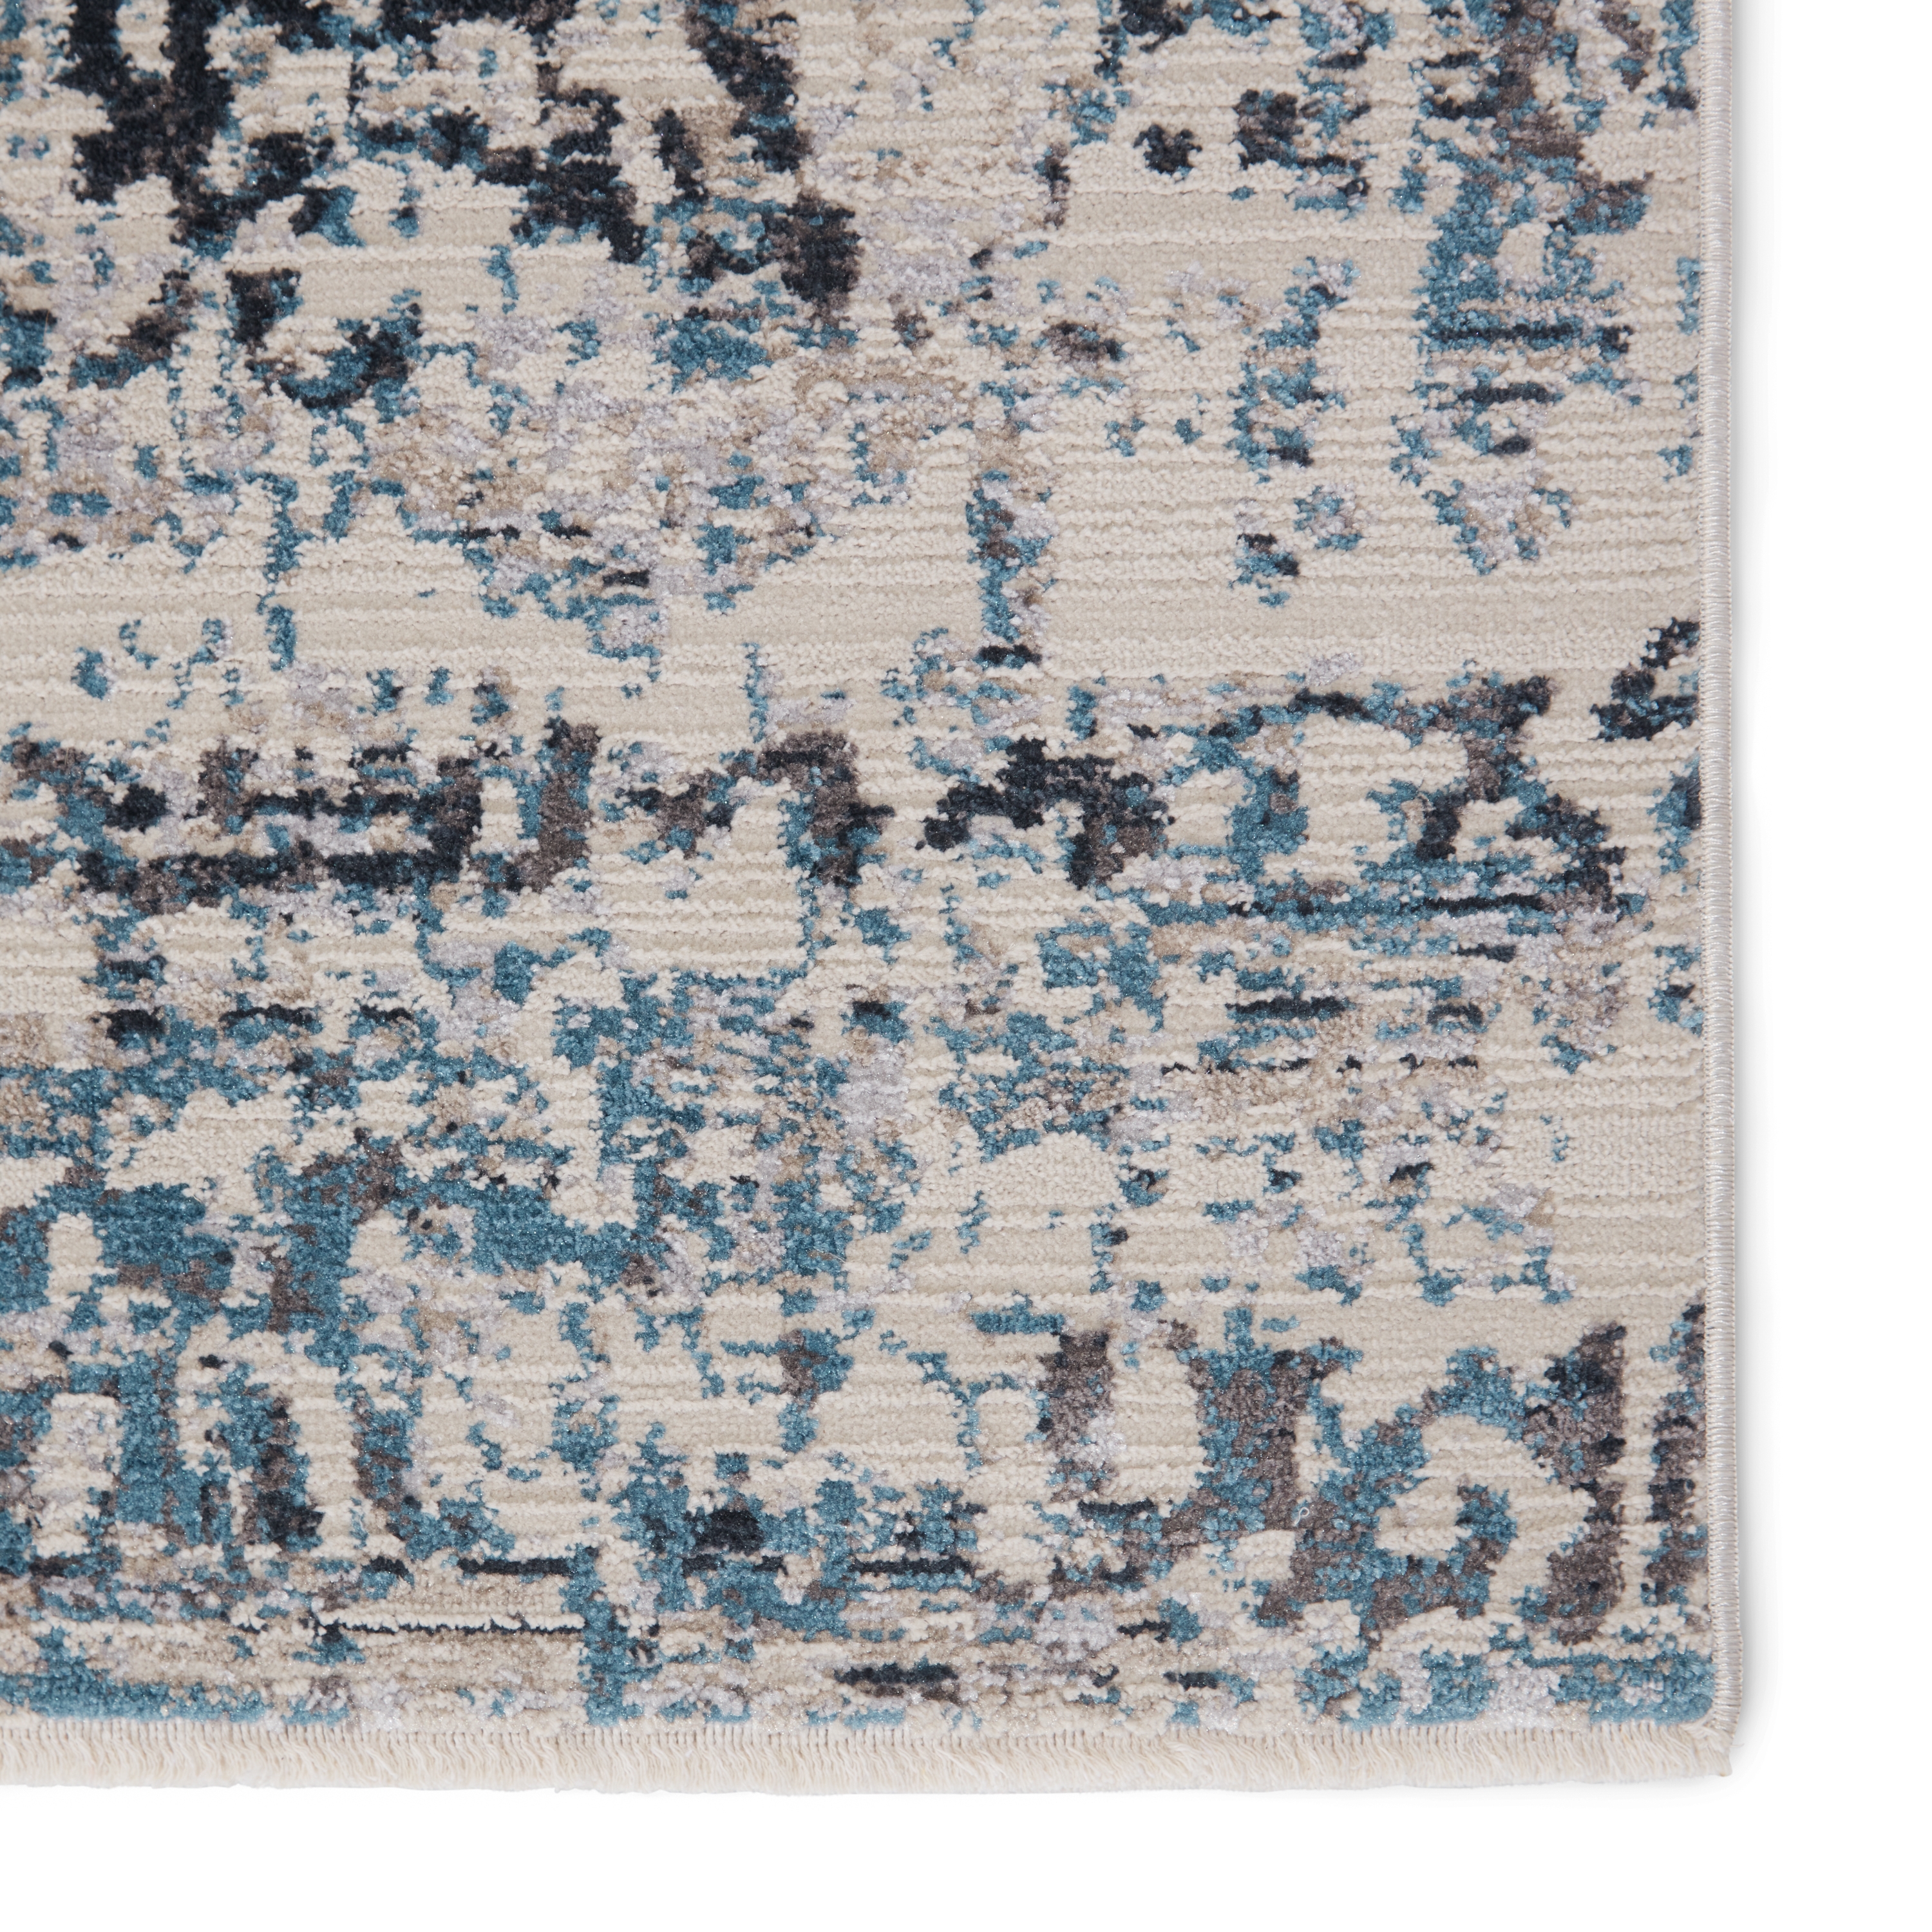 Vibe by Halston Abstract Gray/ Blue Area Rug (7'10"X10'10") - Image 3